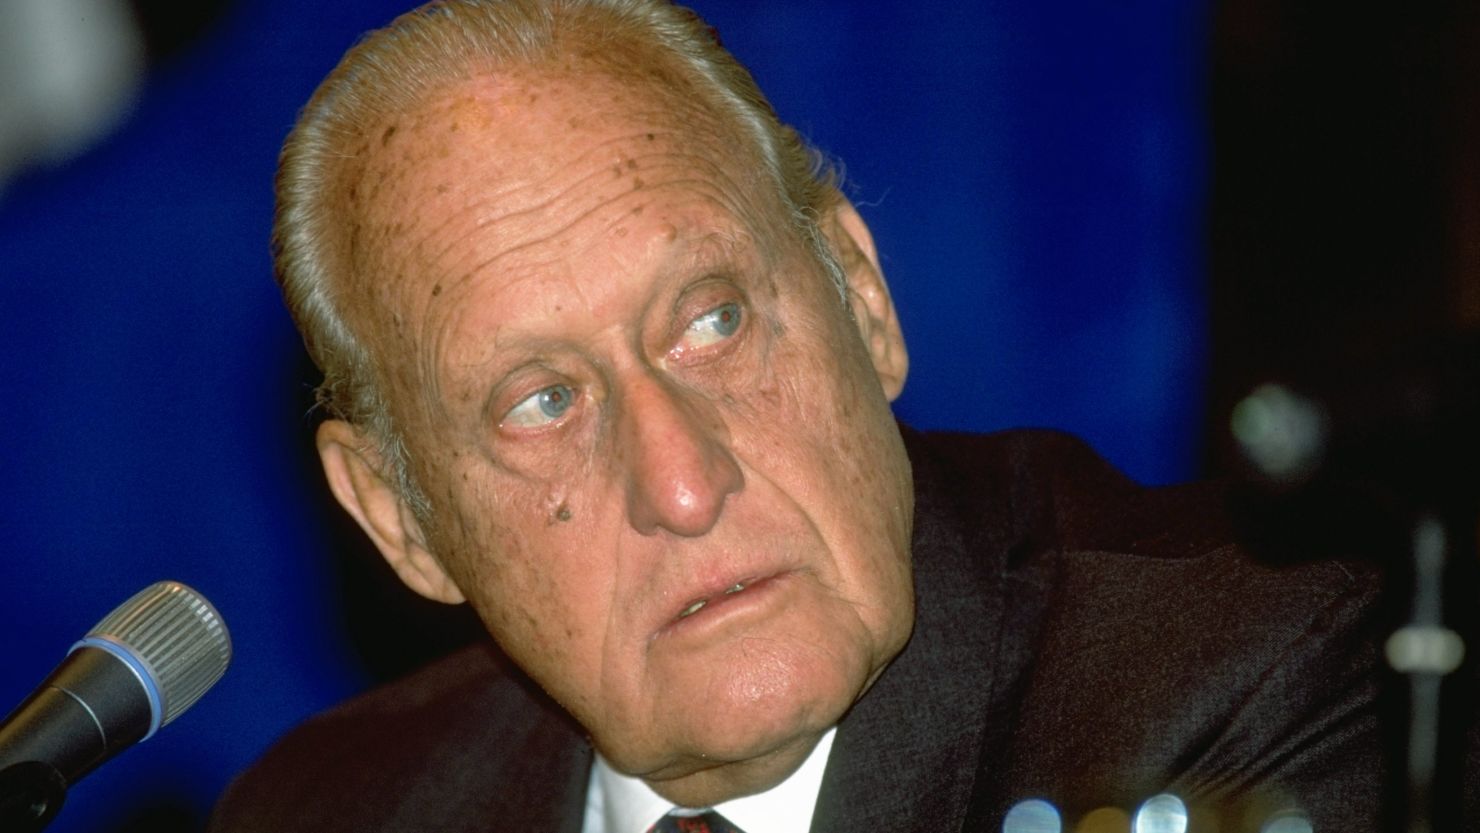 Former FIFA President João Havelange, seen here in 1996, was an Olympic swimmer in his youth.